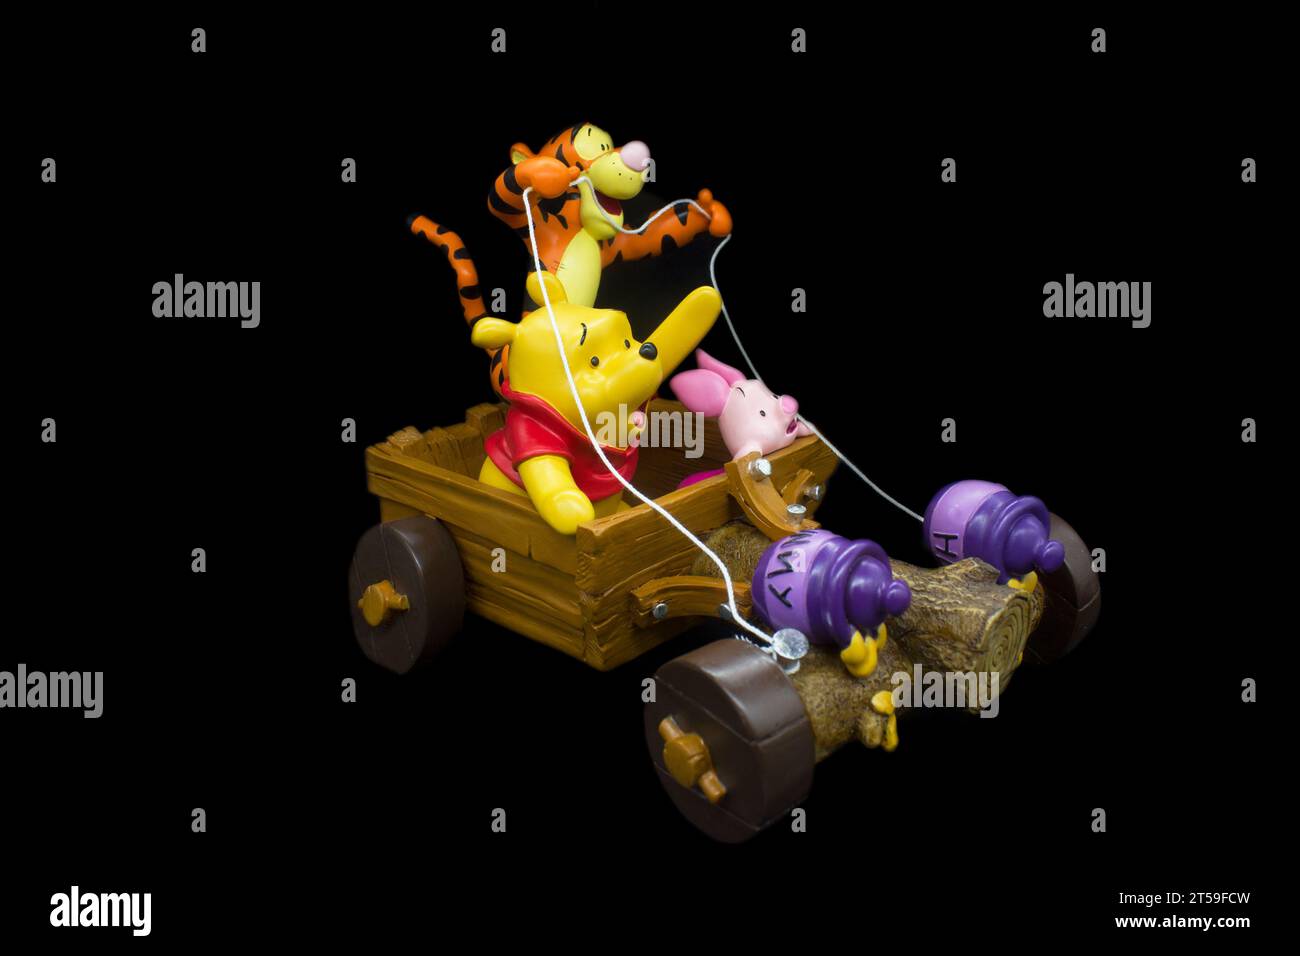 Winnie the pooh and friends Stock Photo